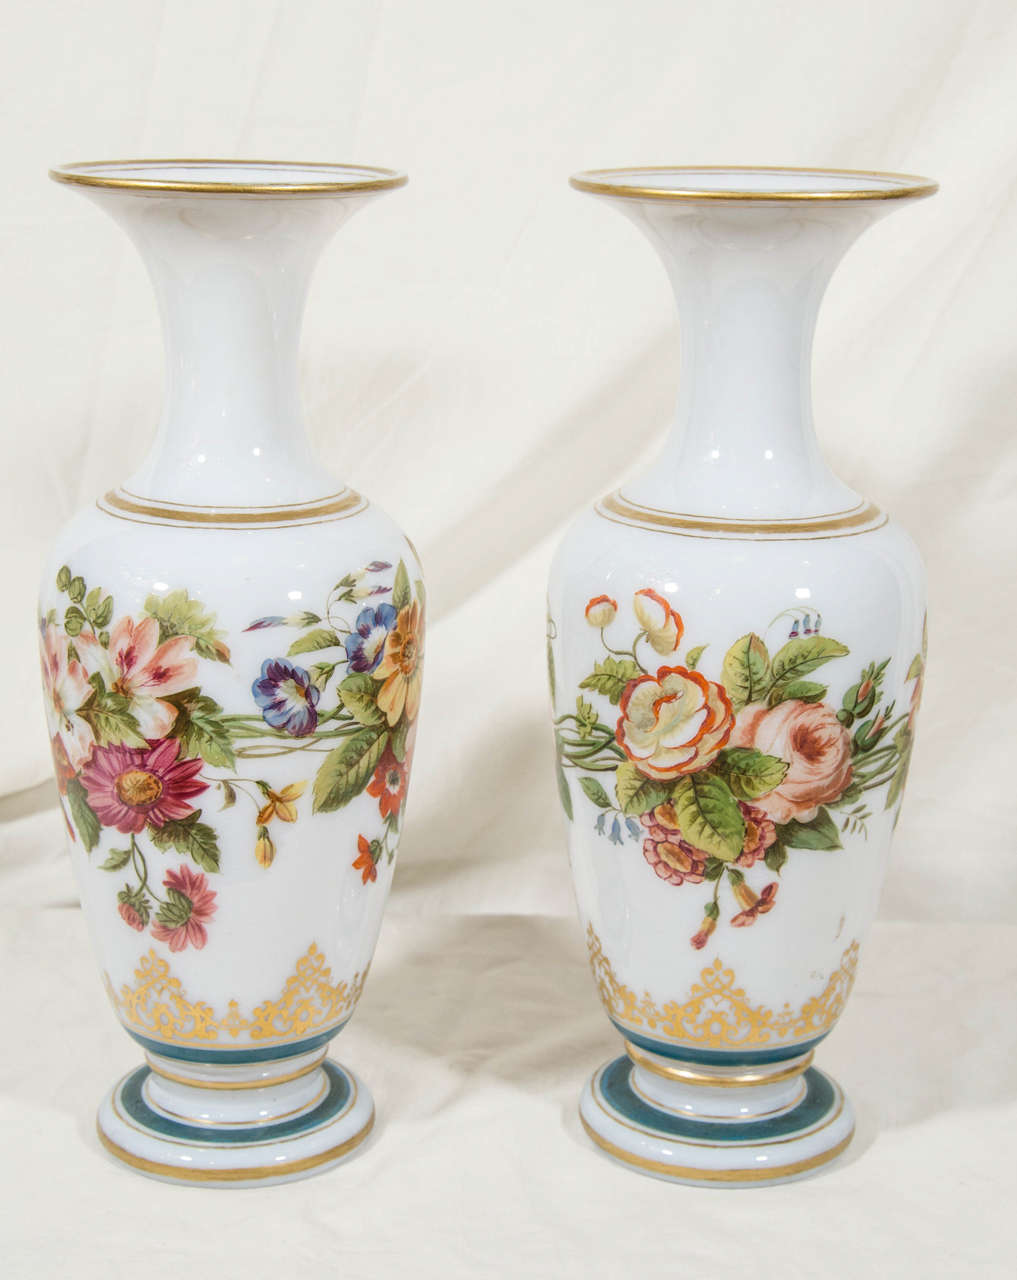 A pair of opaline vases with beautifully painted bouquets of hand-painted flowers. The glass is slightly translucent, handblown and without seams. Opaline is a decorative style of handblown glass made in France beginning, circa 1800.